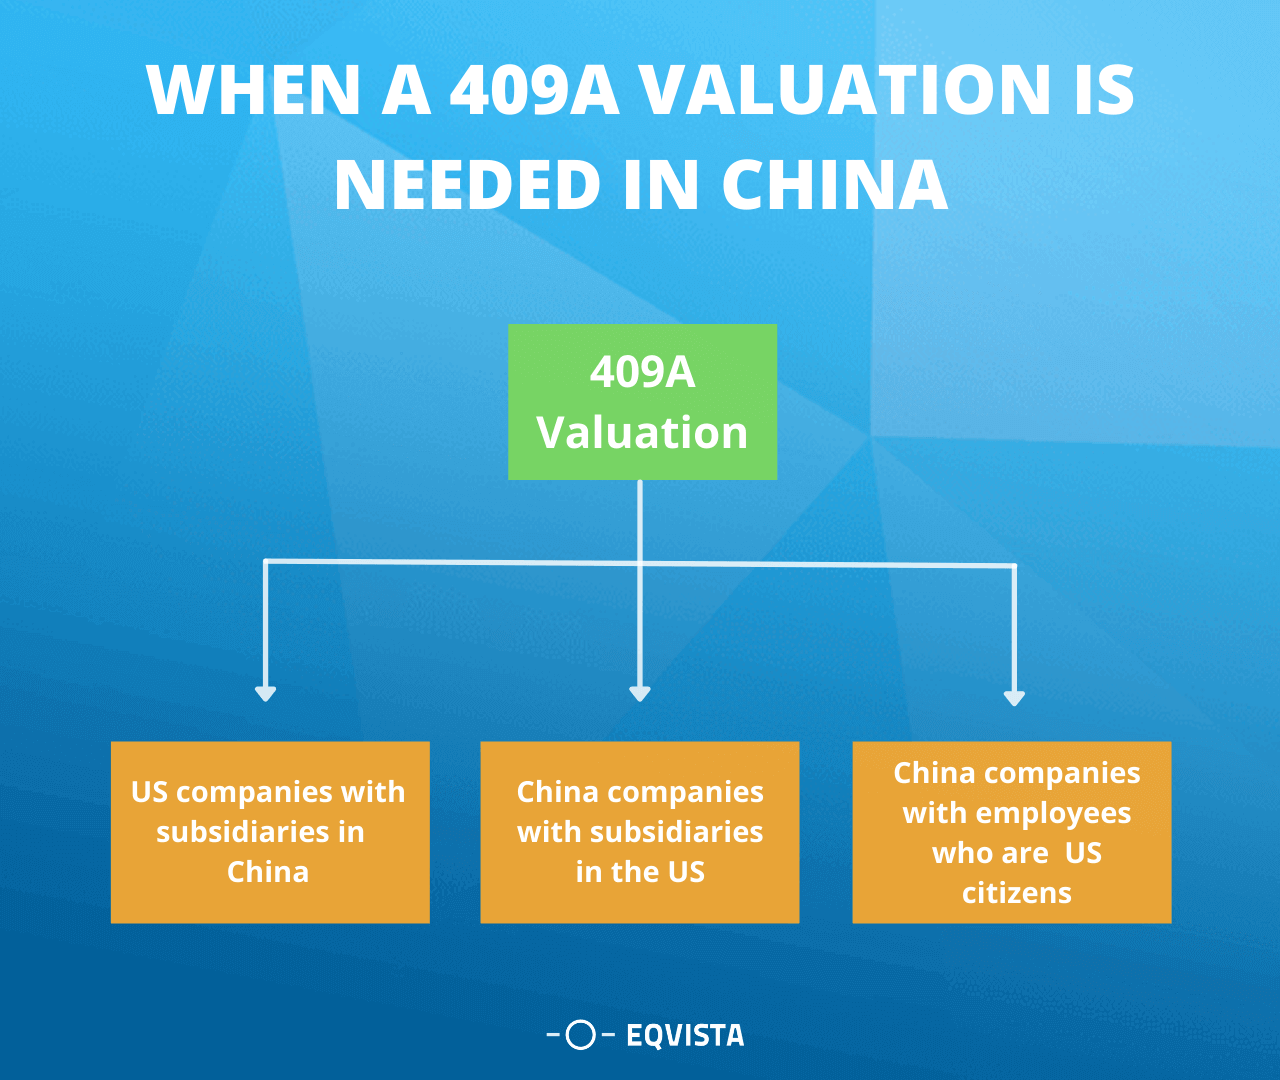 When is a 409a valuation required for a China company?